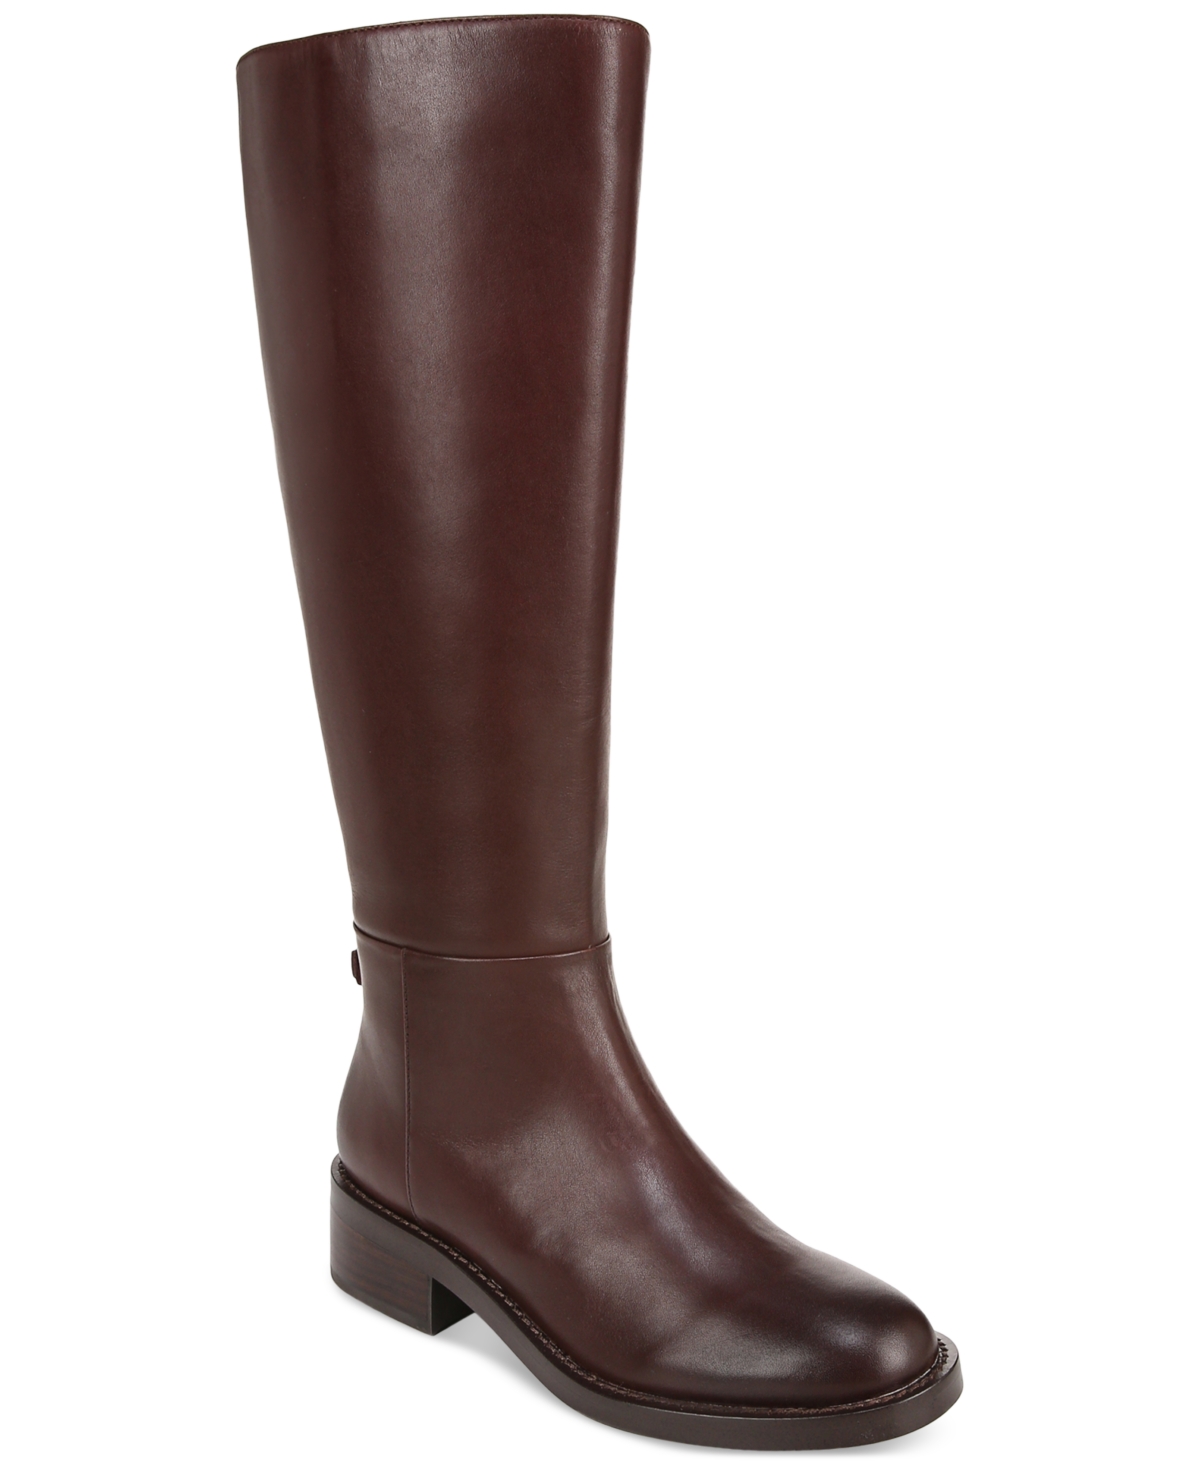 SAM EDELMAN WOMEN'S MABLE TALL RIDING BOOTS